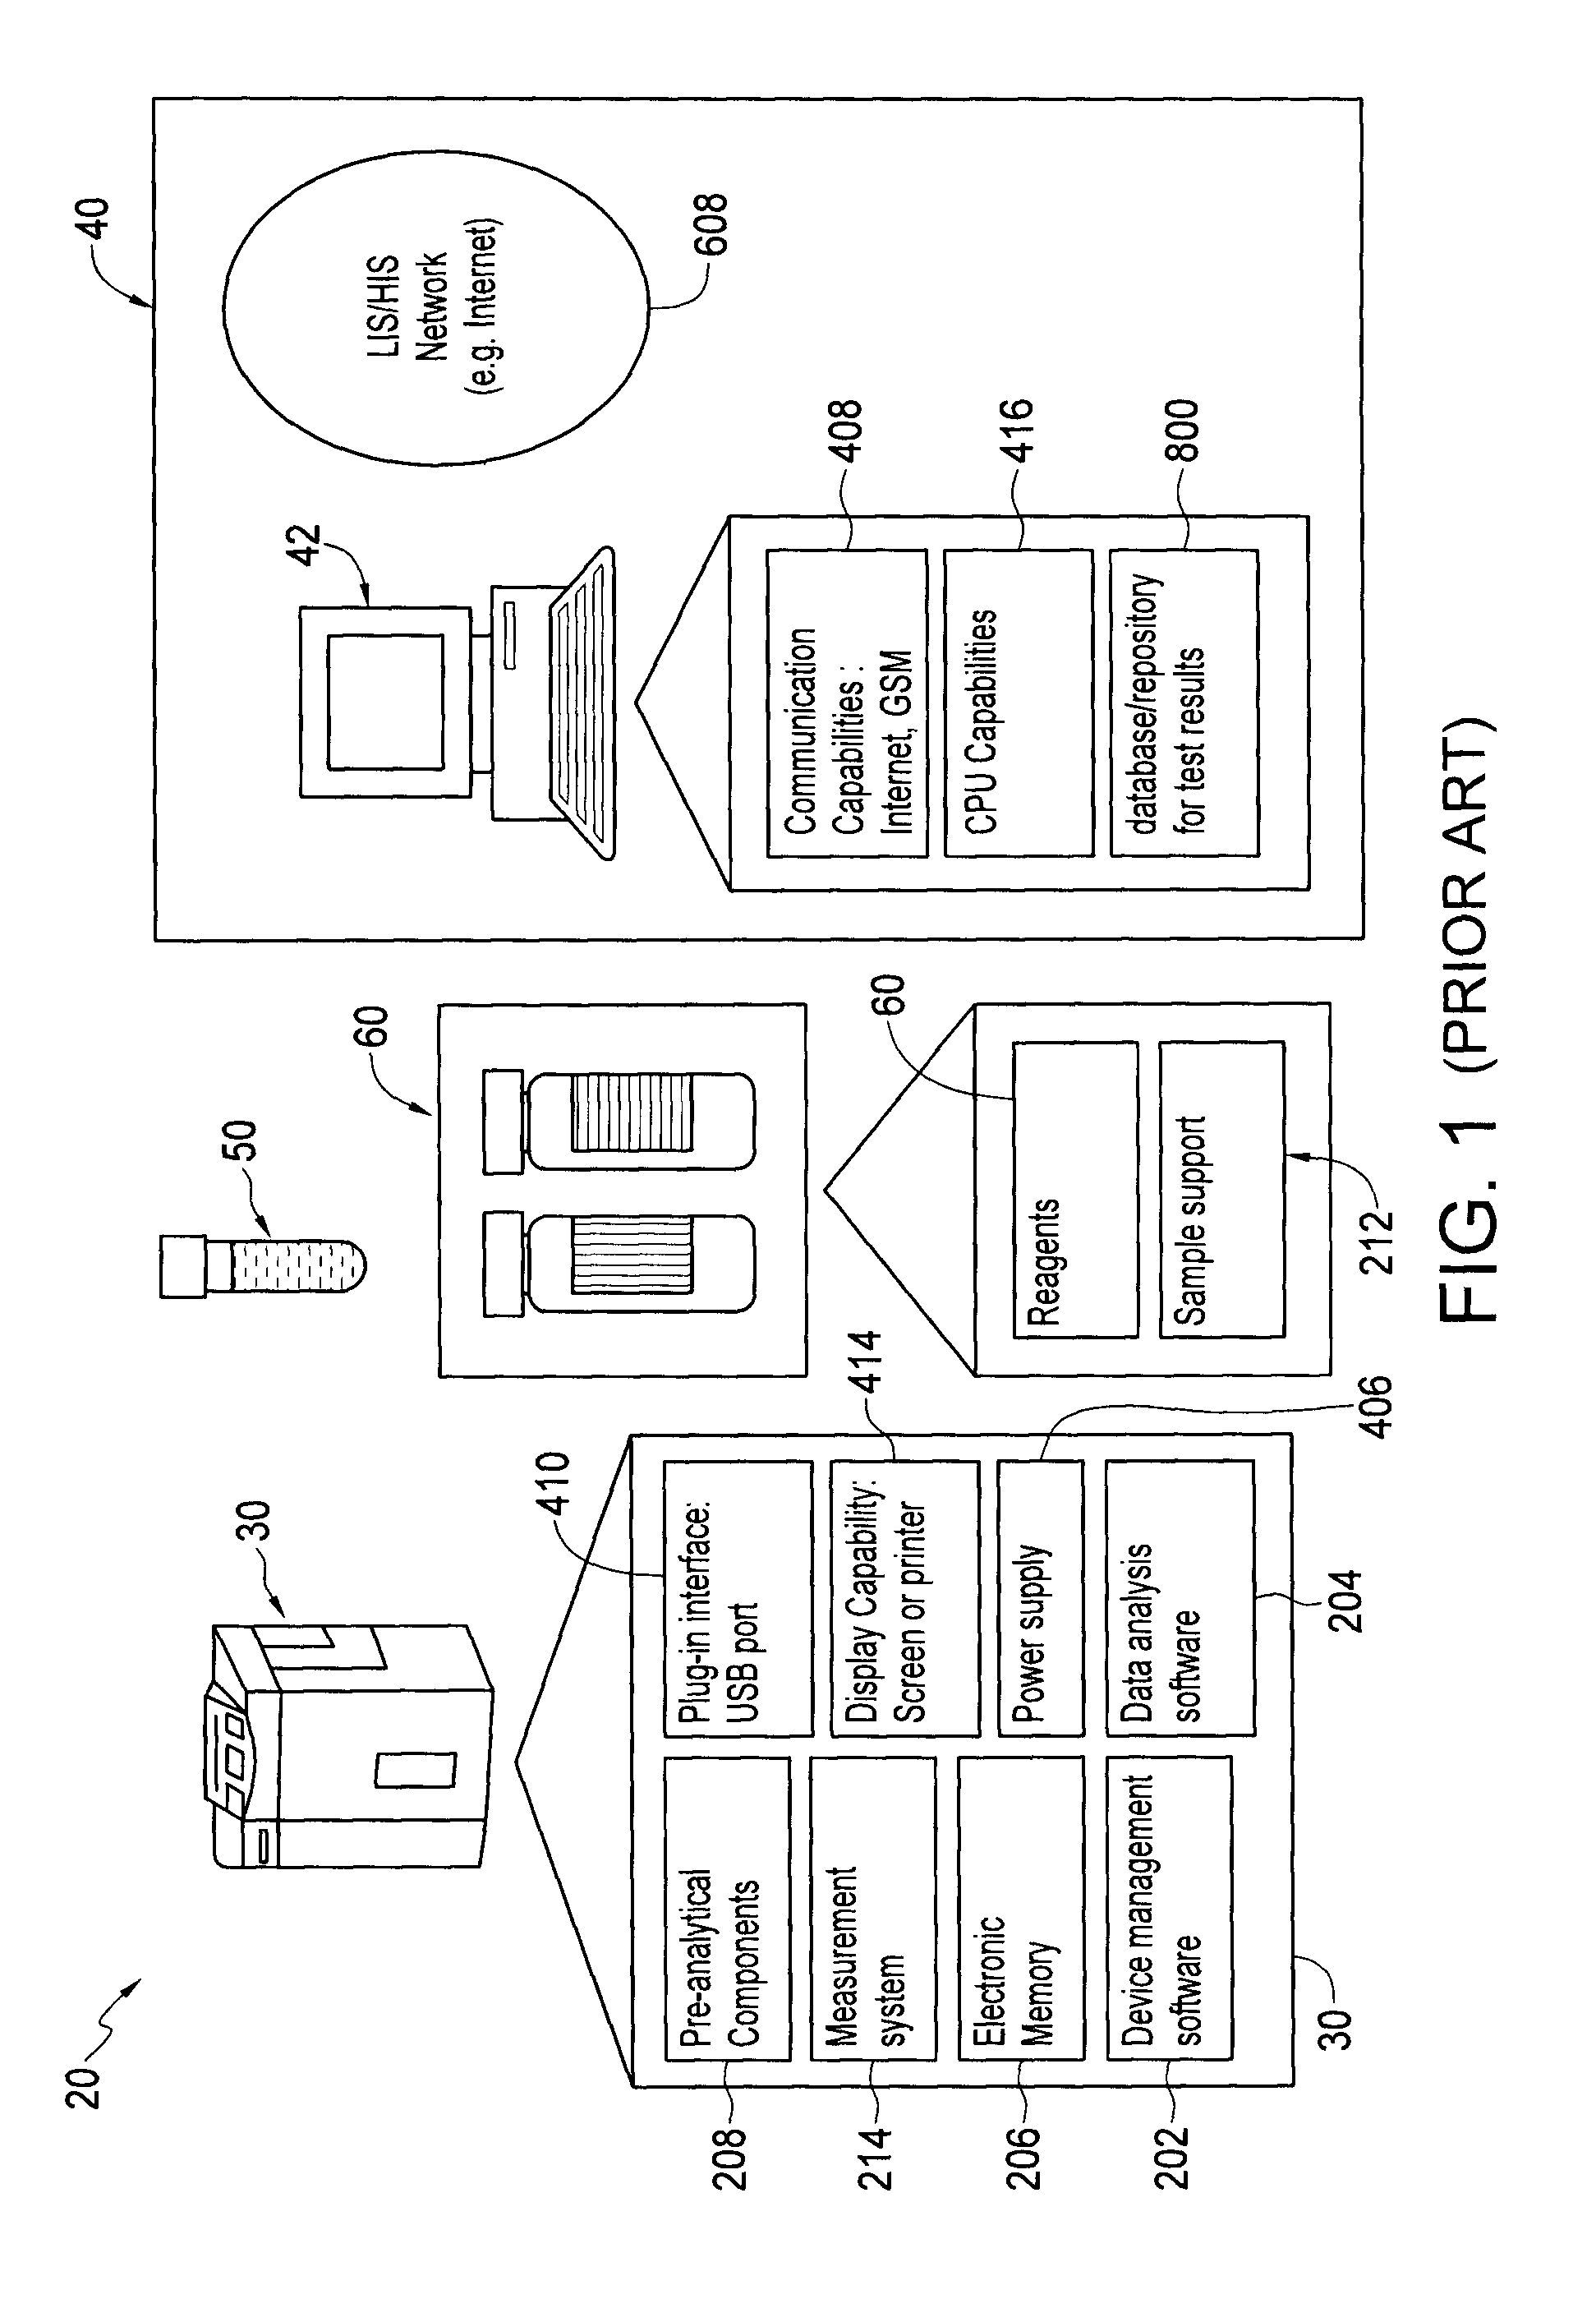 Single-use handheld diagnostic test device, and an associated system and method for testing biological and environmental test samples